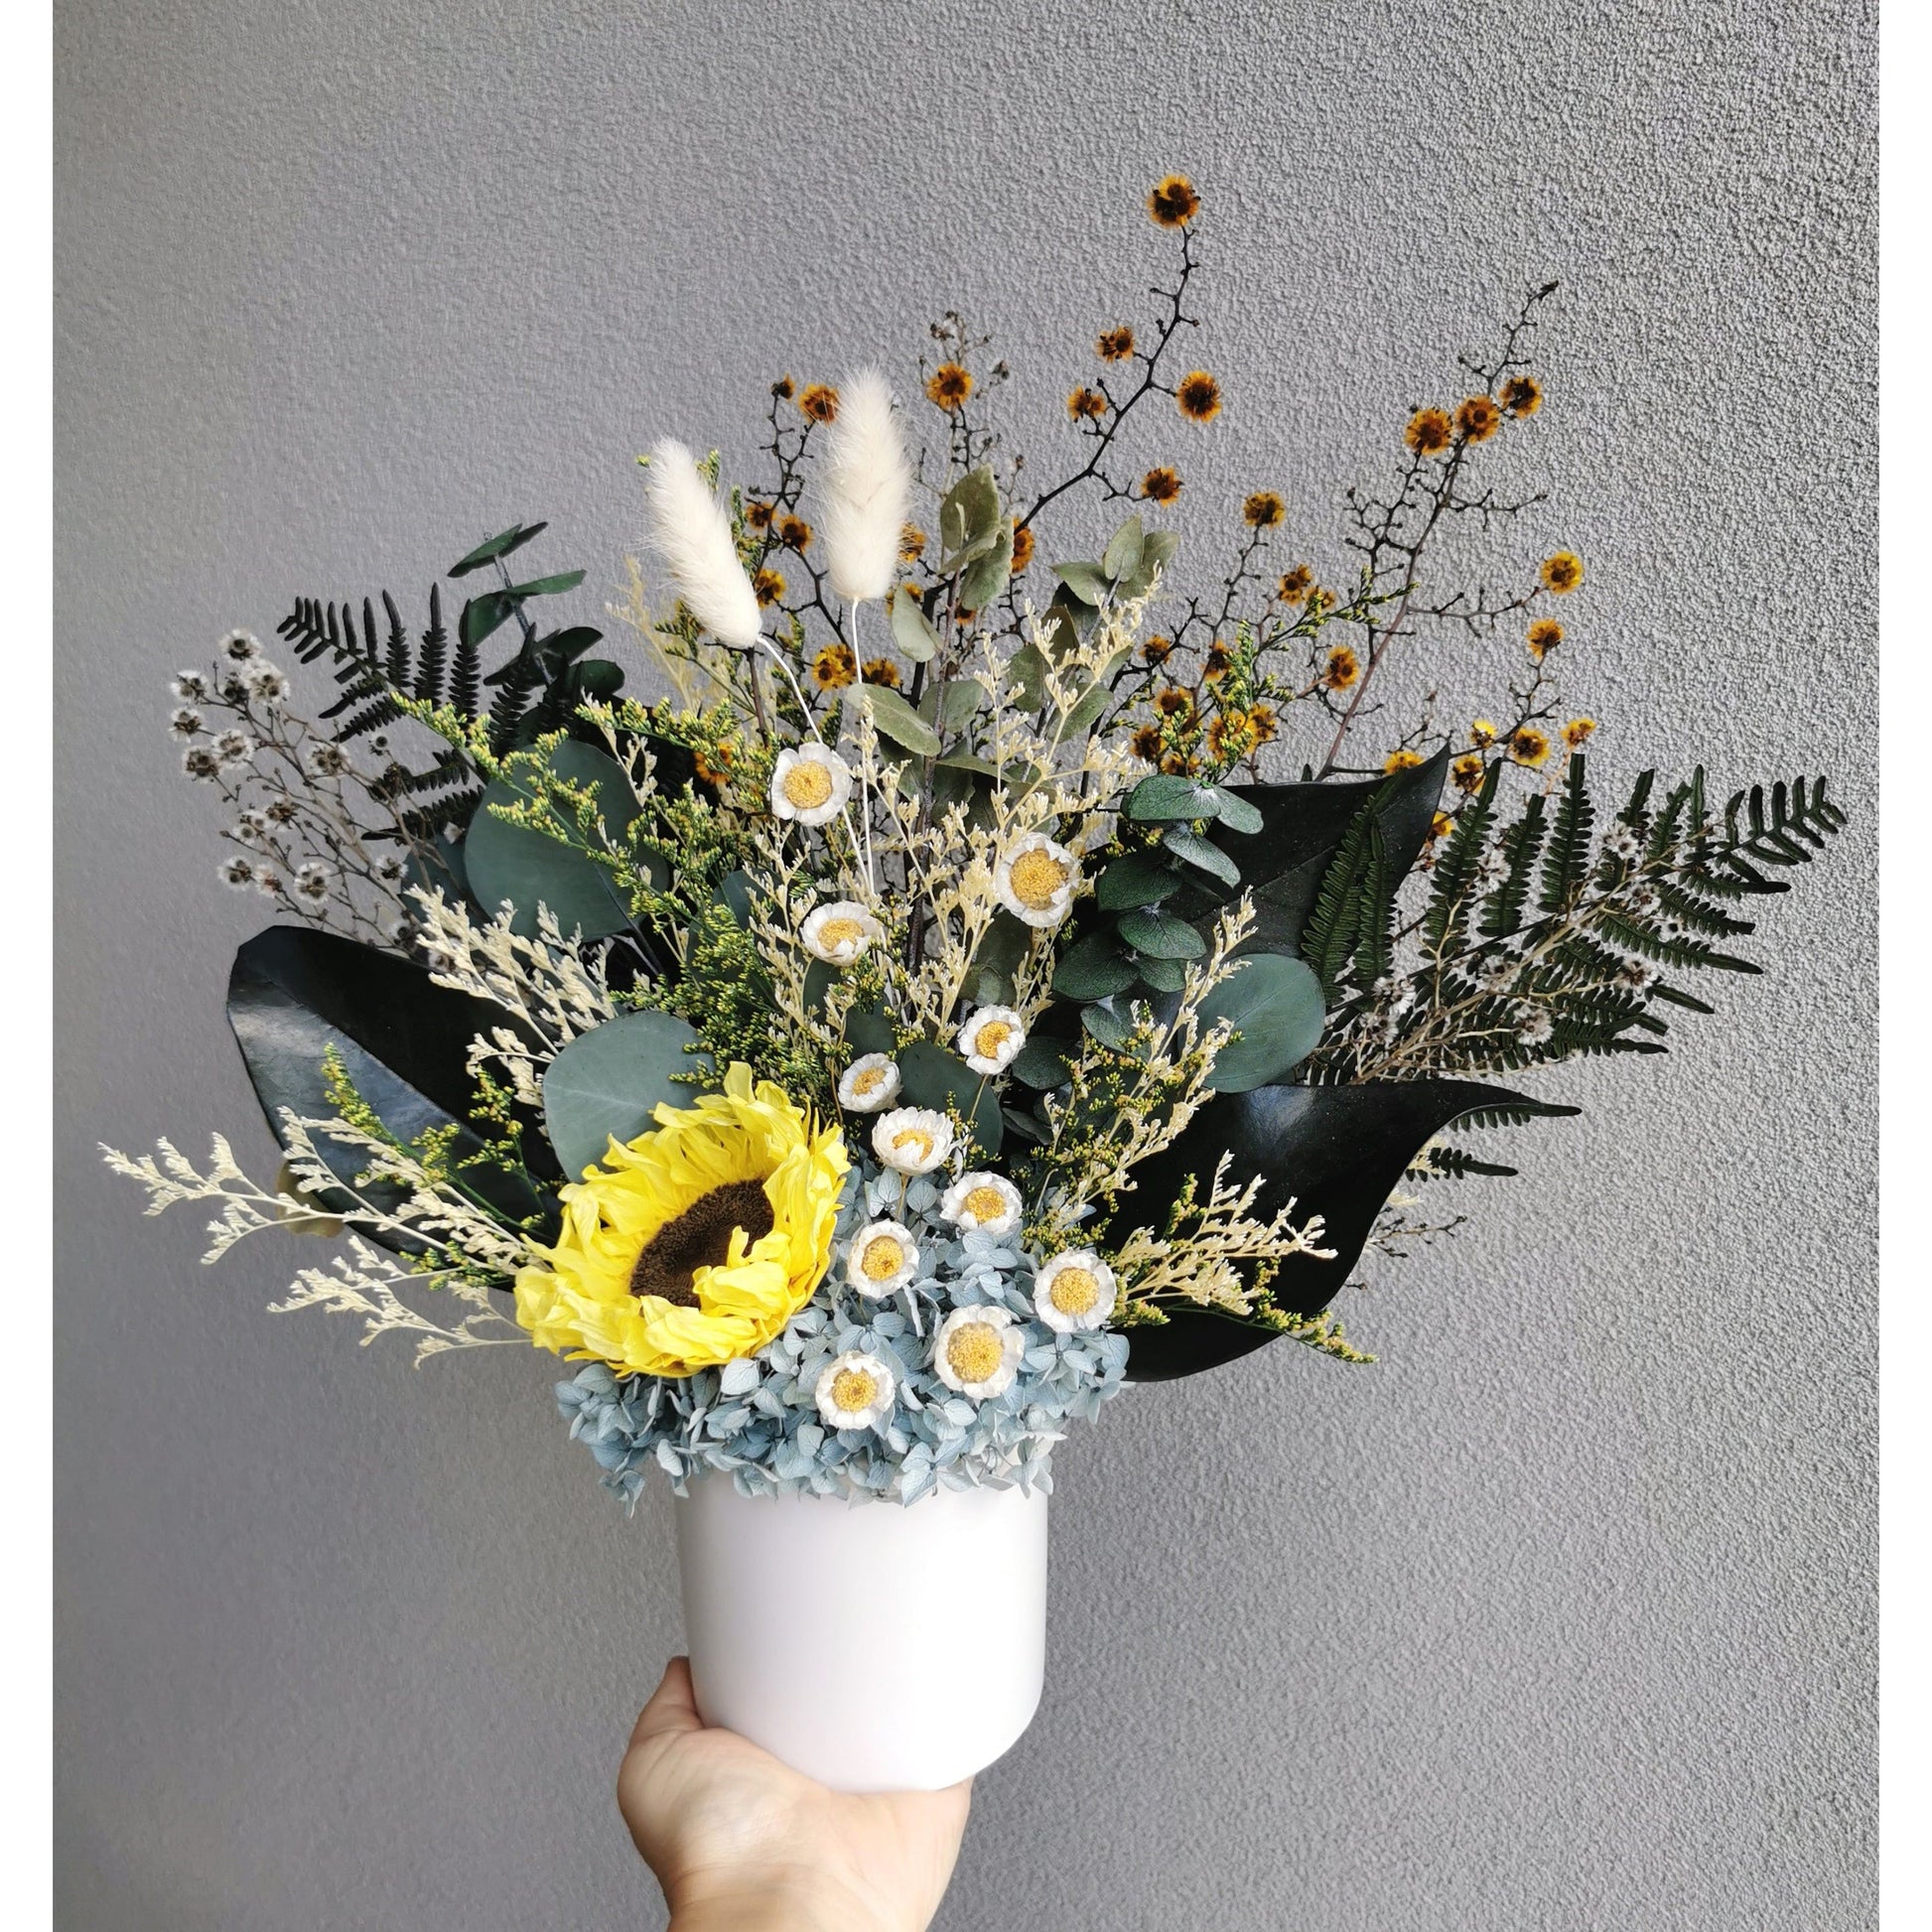 Dried & Preserved flower arrangement featuring a preserved yellow sunflower and yellow daisies and lush greenery and set in to a white pot. Photo shows arrangement being held by hand against a blank wall